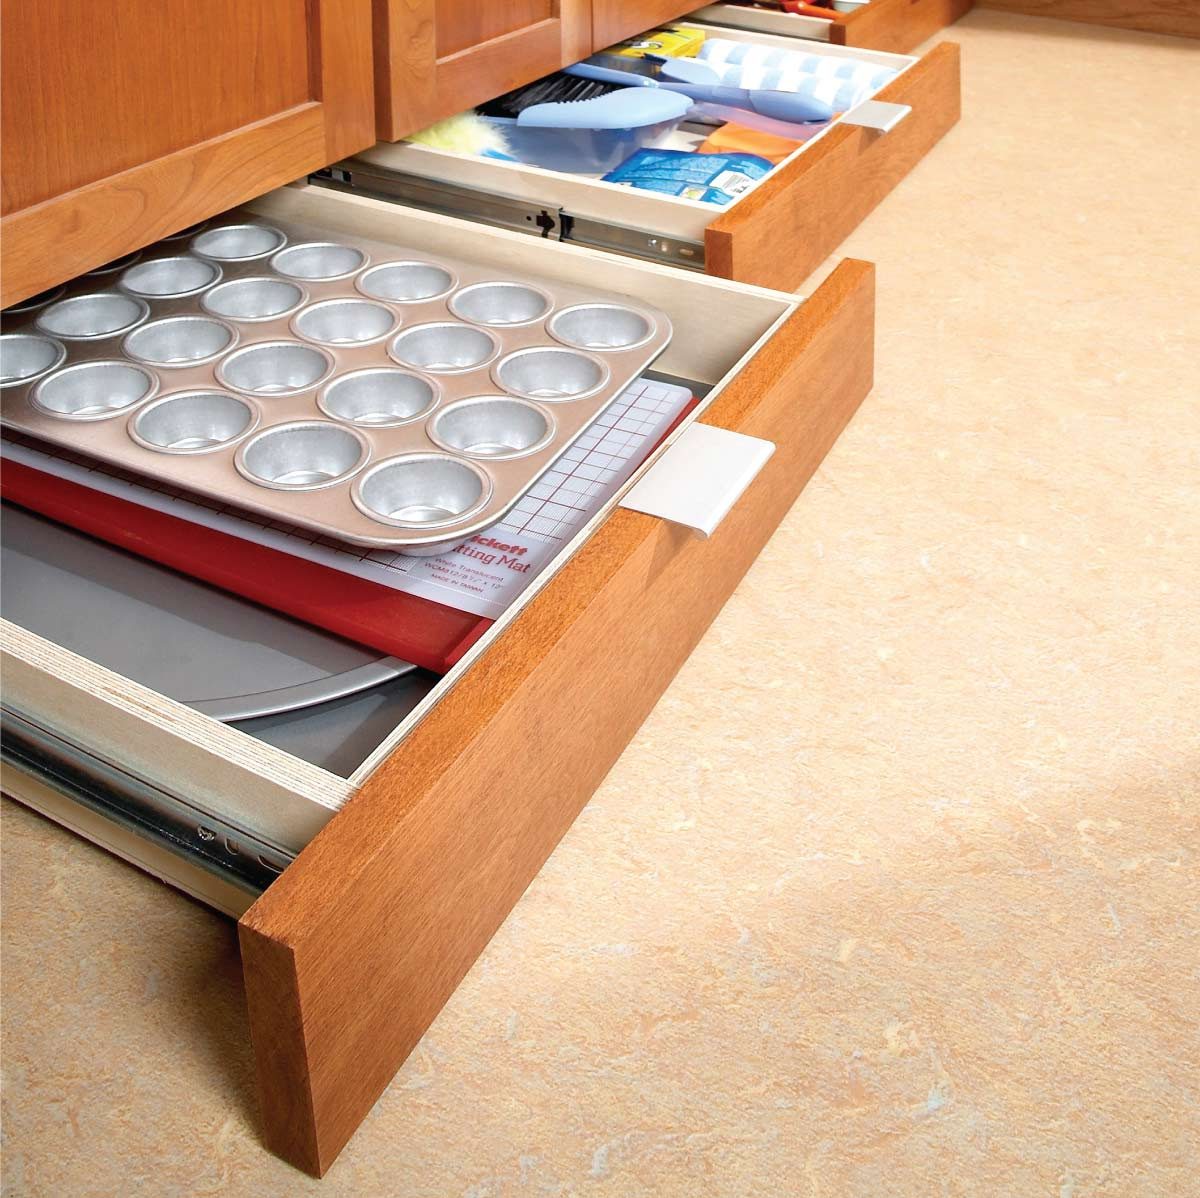 https://www.familyhandyman.com/wp-content/uploads/2019/04/FH09MAY_498_58_219-under-cabinet-drawer-featured.jpg?resize=522%2C522